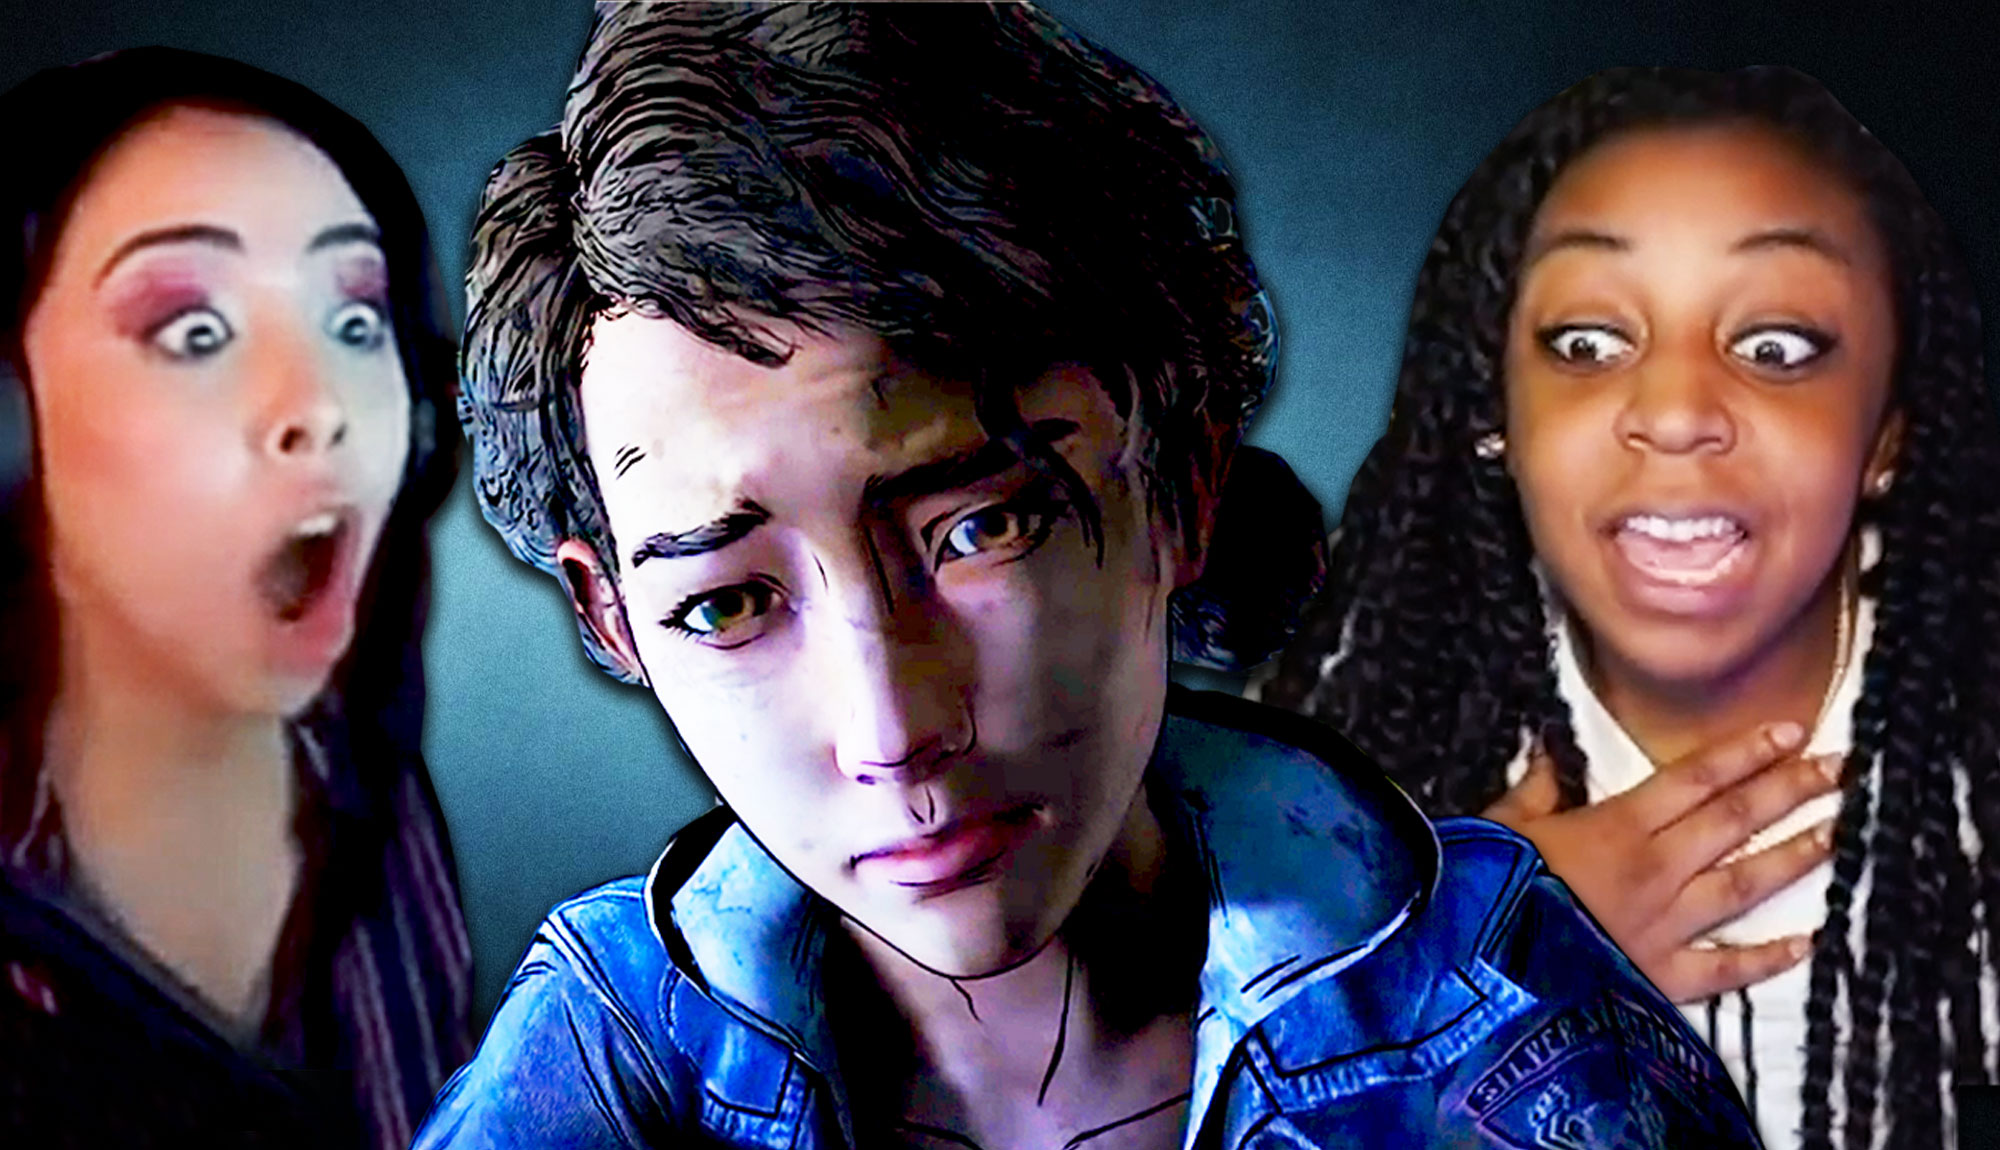 Gamers React to The Final Episode of Telltale’s The Walking Dead